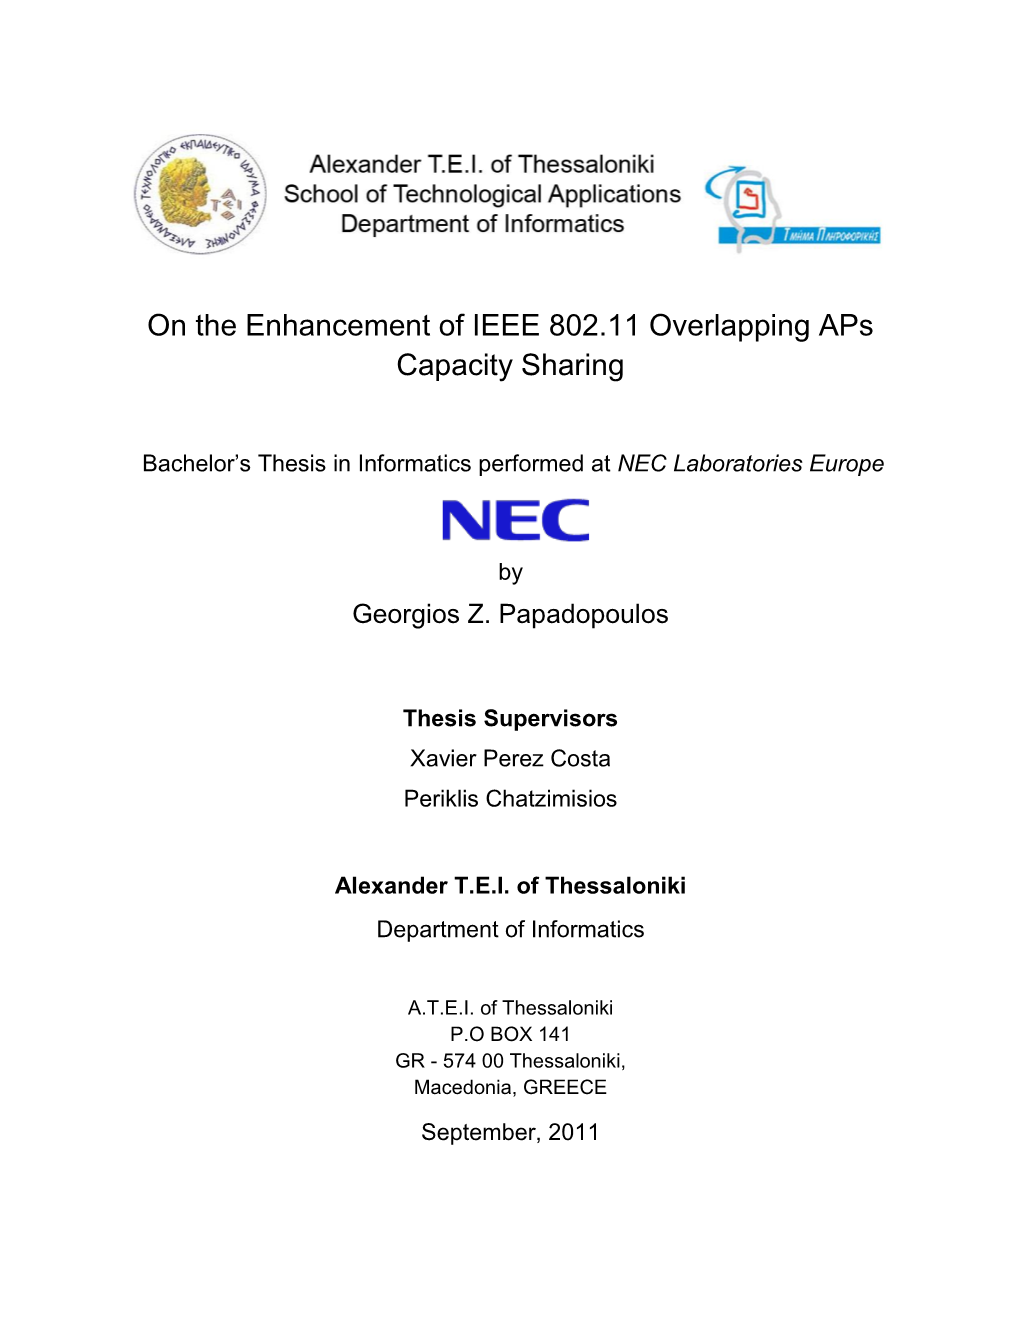 On the Enhancement of IEEE 802.11 Overlapping Aps Capacity Sharing